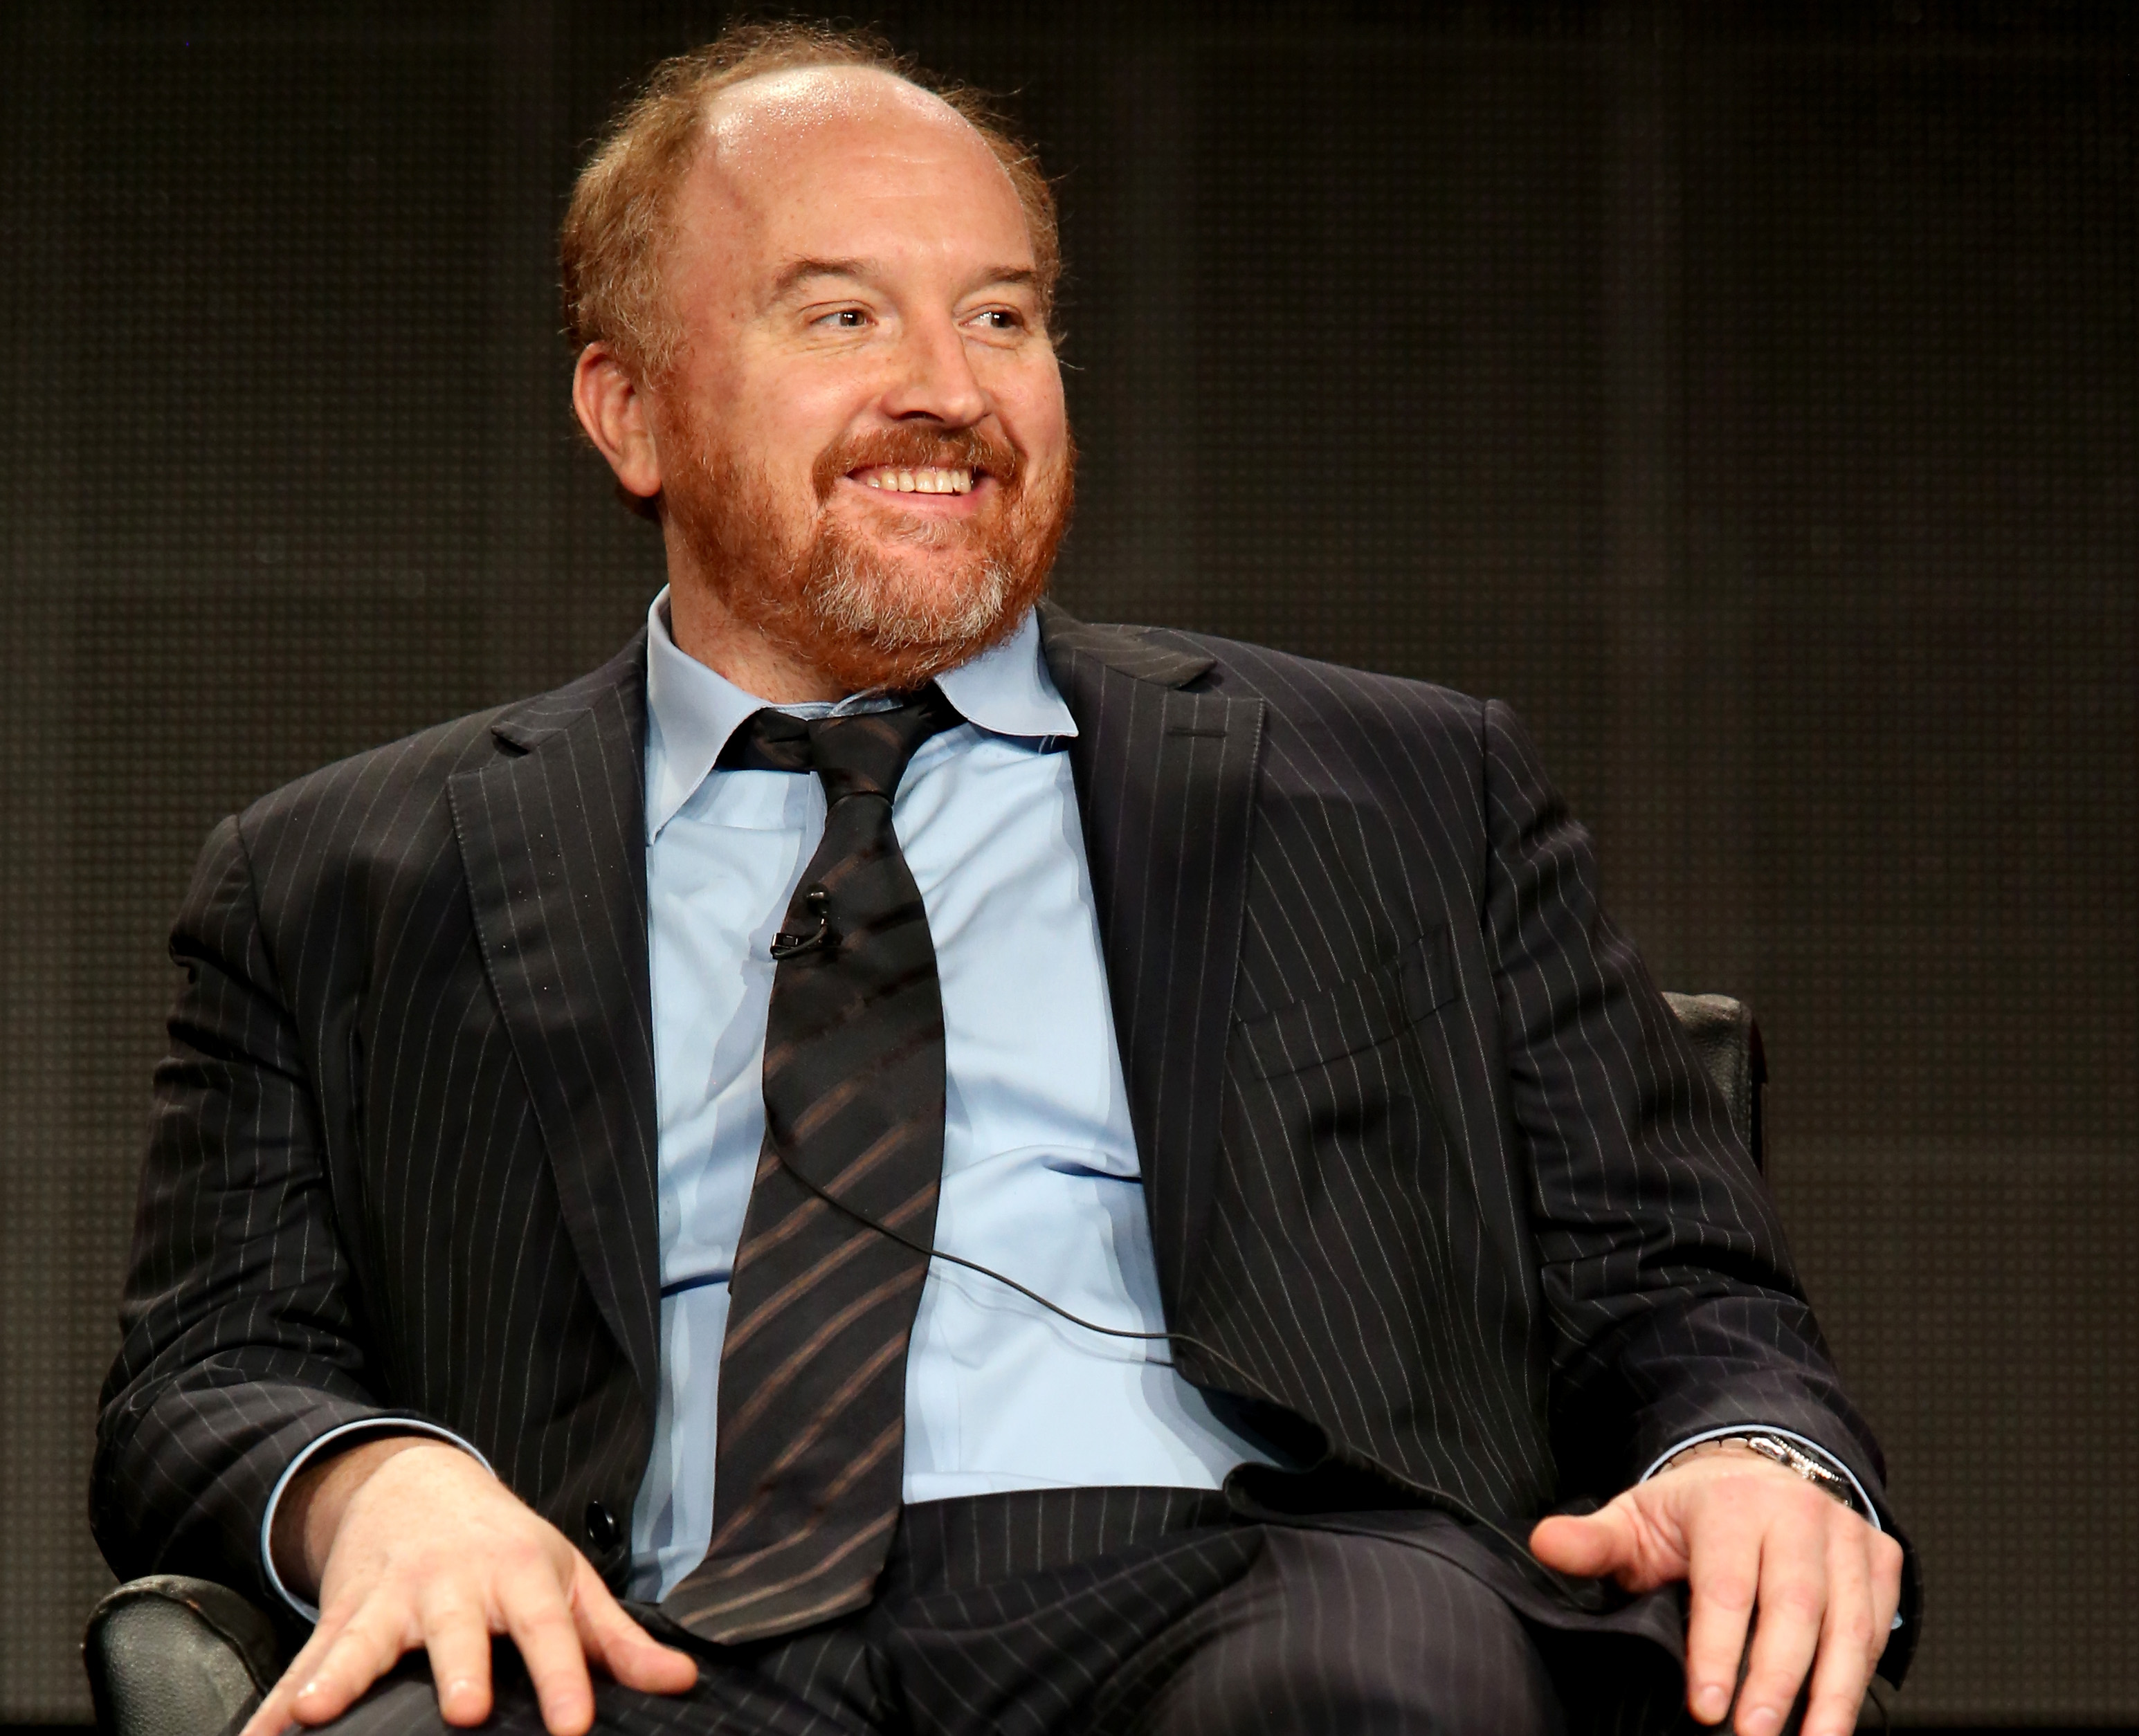 Actor Louis C.K. speaks during the 'Louie' panel discussion of the Television Critics Association press tour on Jan. 18, 2015 in Pasadena, California.